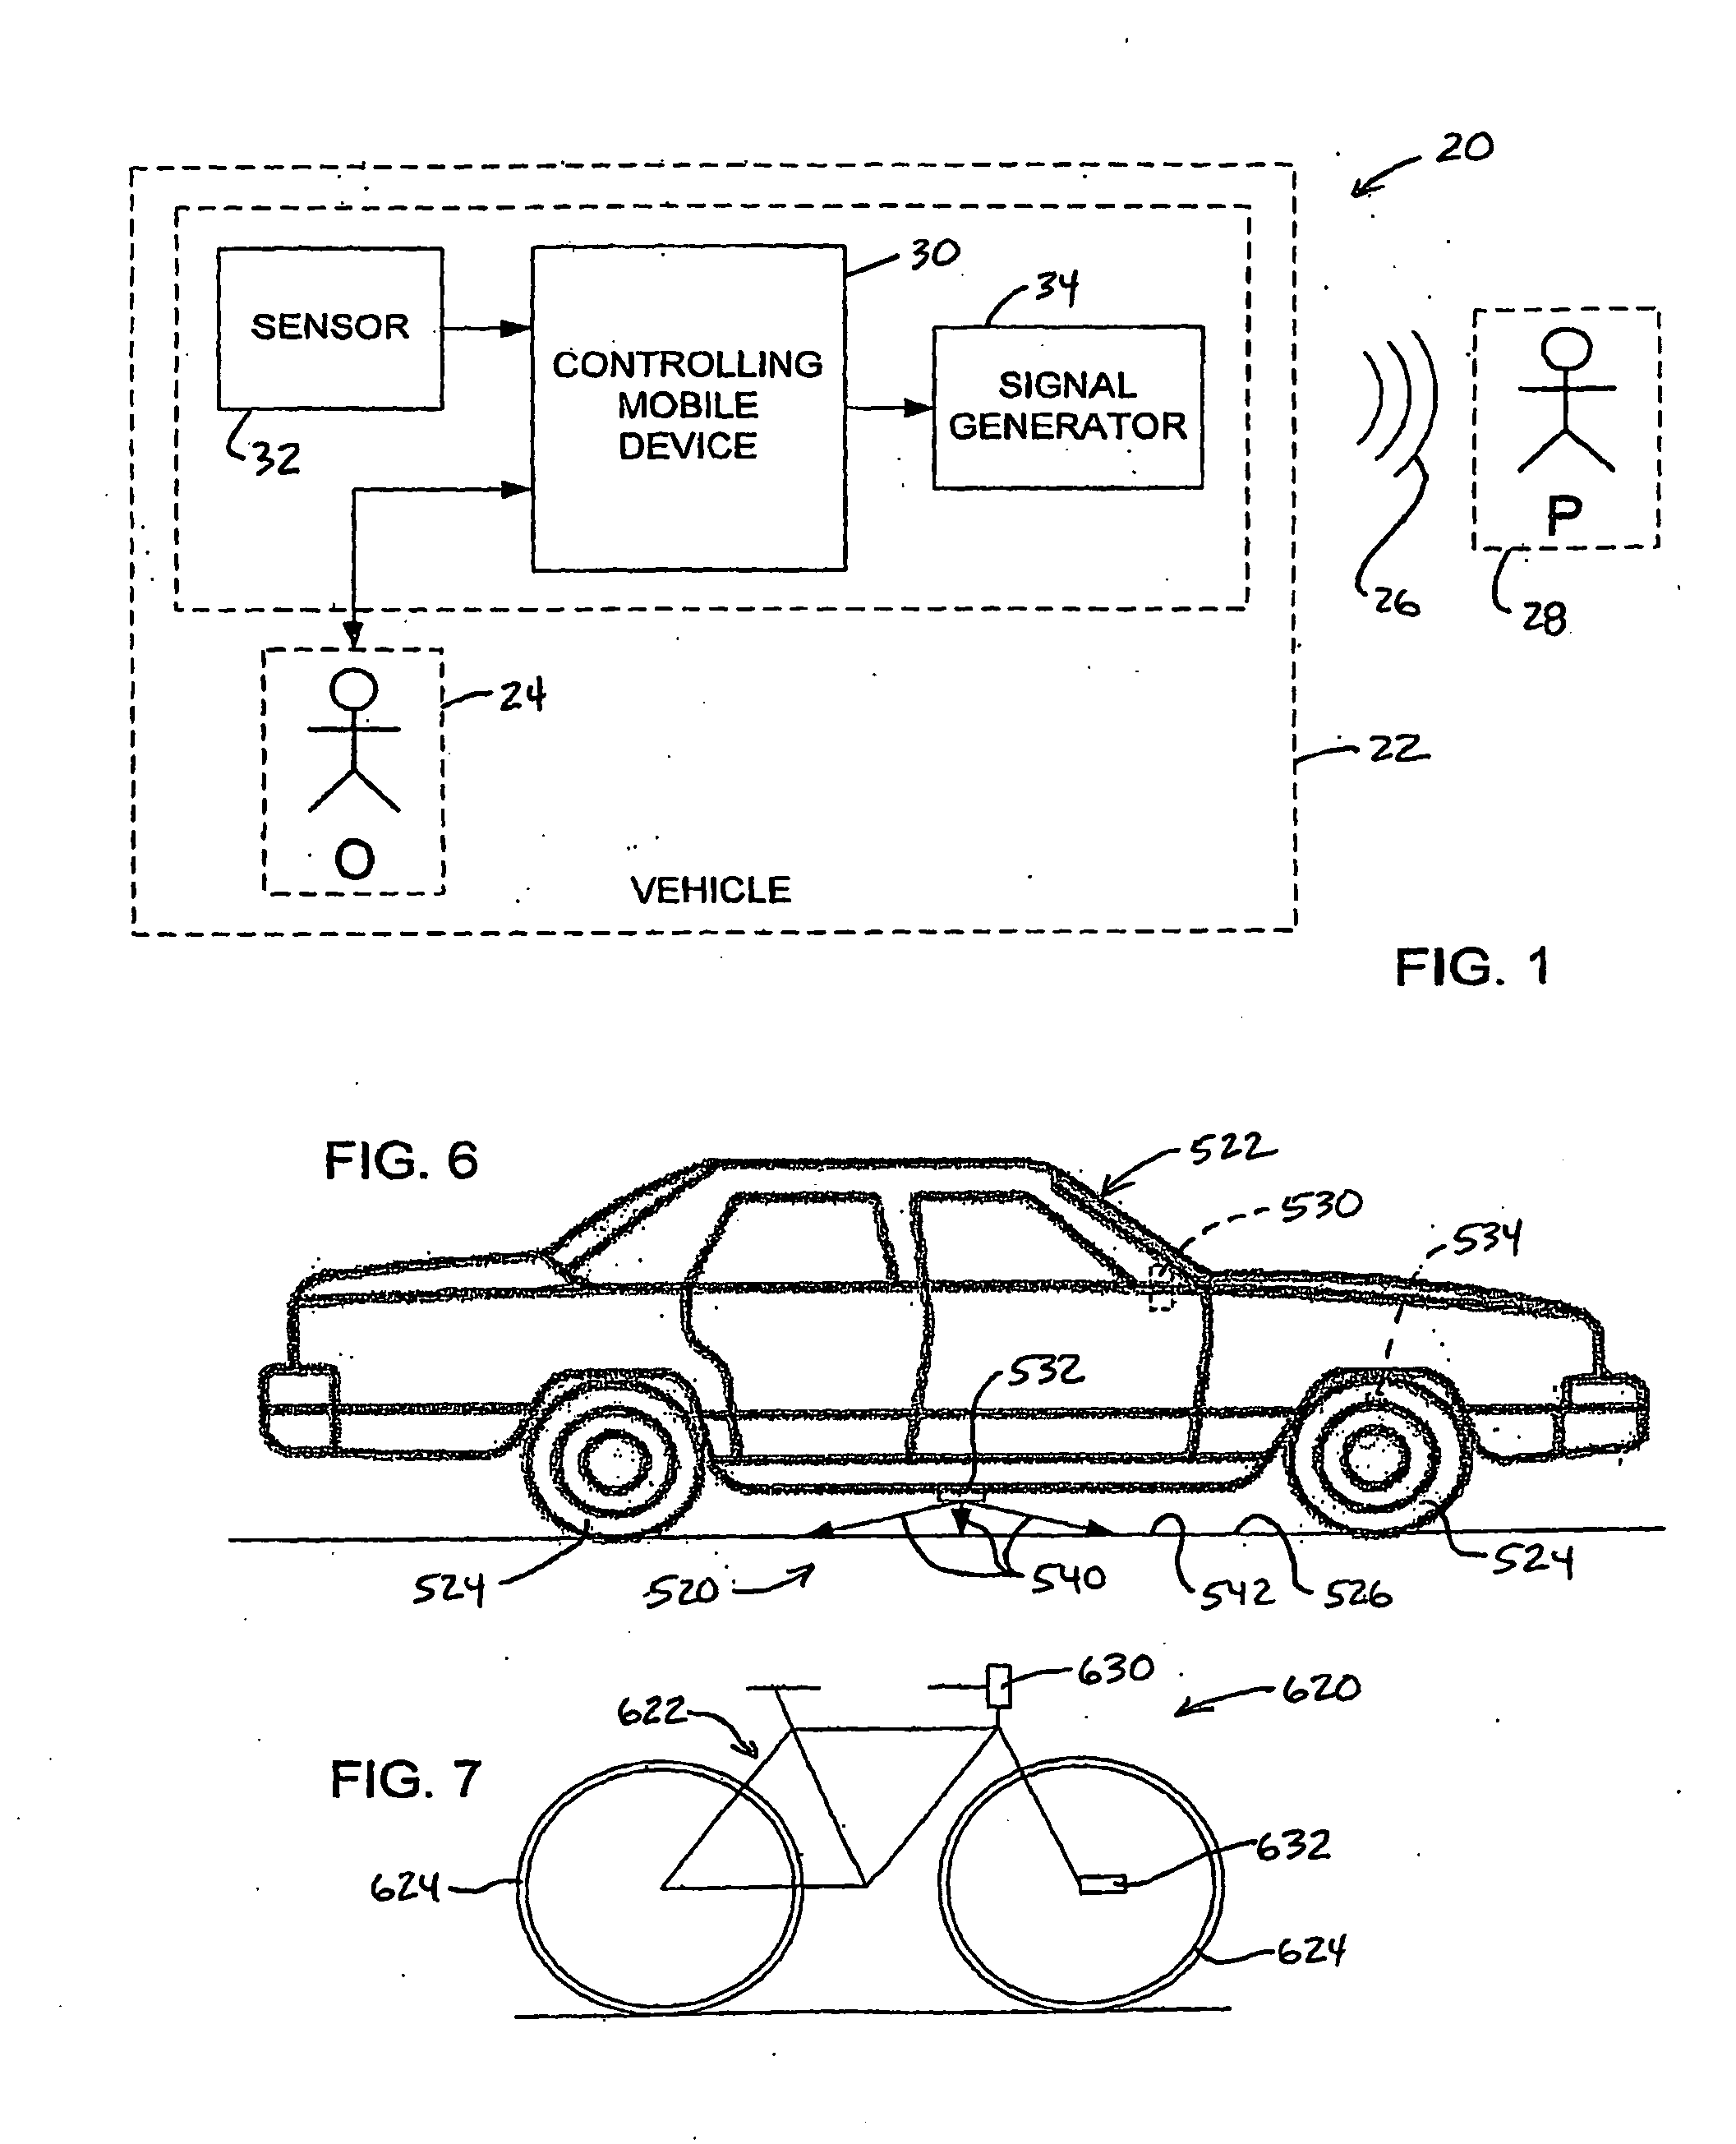 Systems and methods for simulating motion with sound